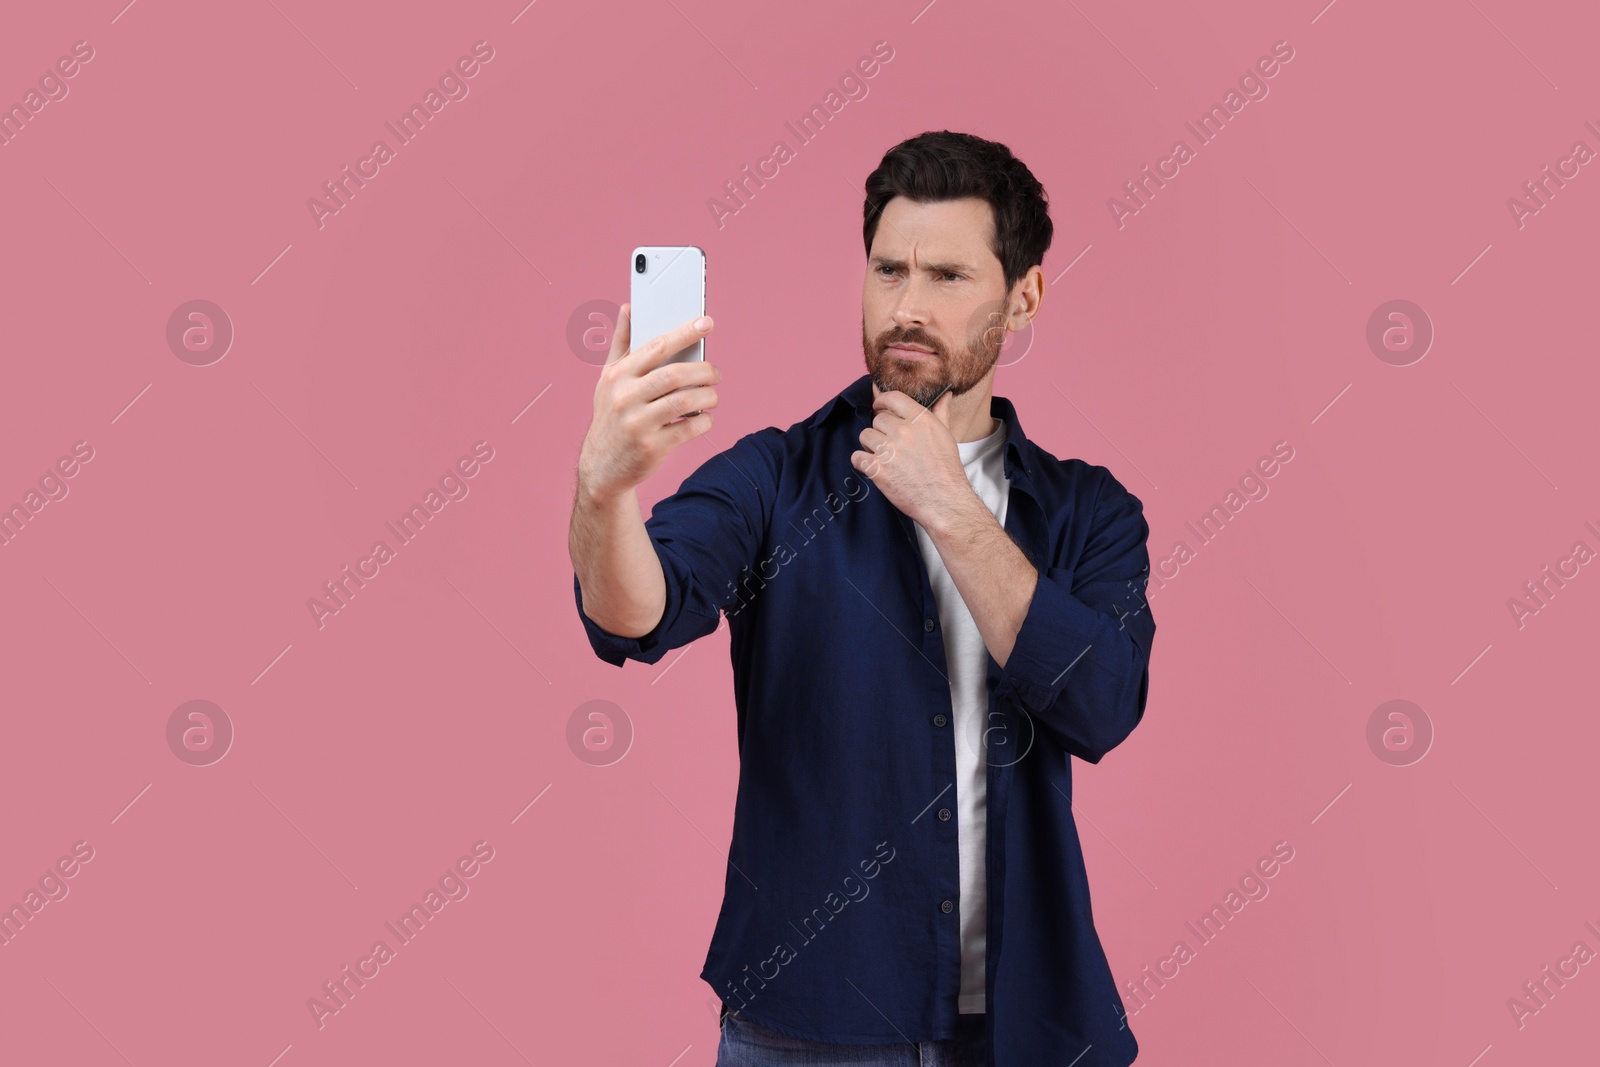 Photo of Man taking selfie with smartphone on pink background, space for text